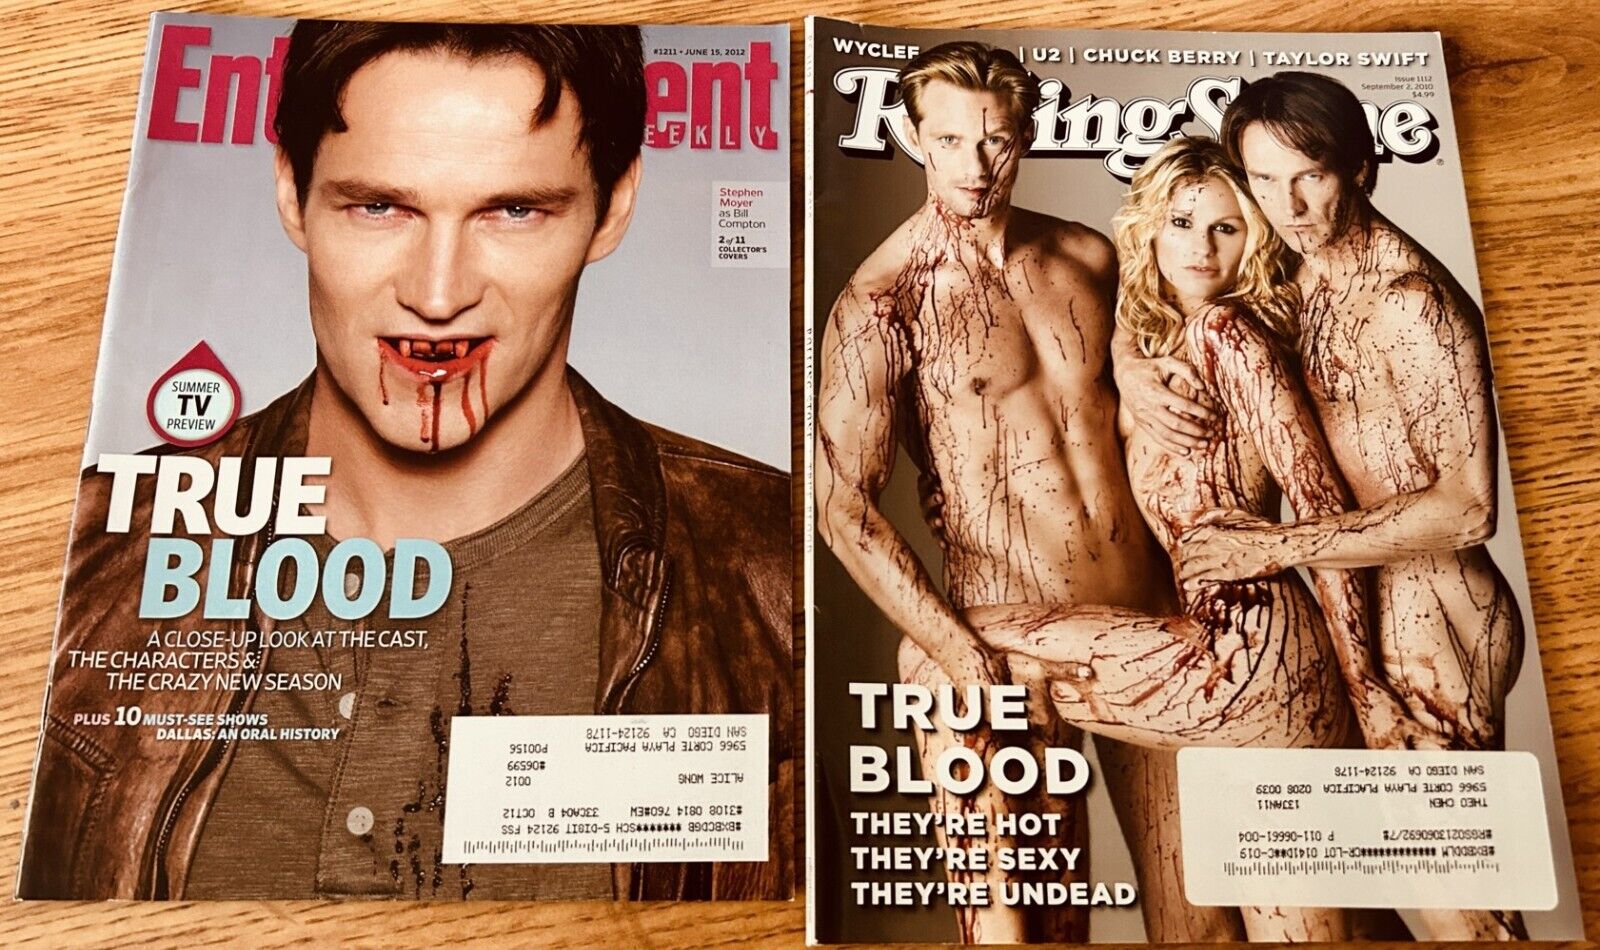 True Blood 2012 Entertainment Weekly AND 2010 Rolling Stone issues Stephen Moyer